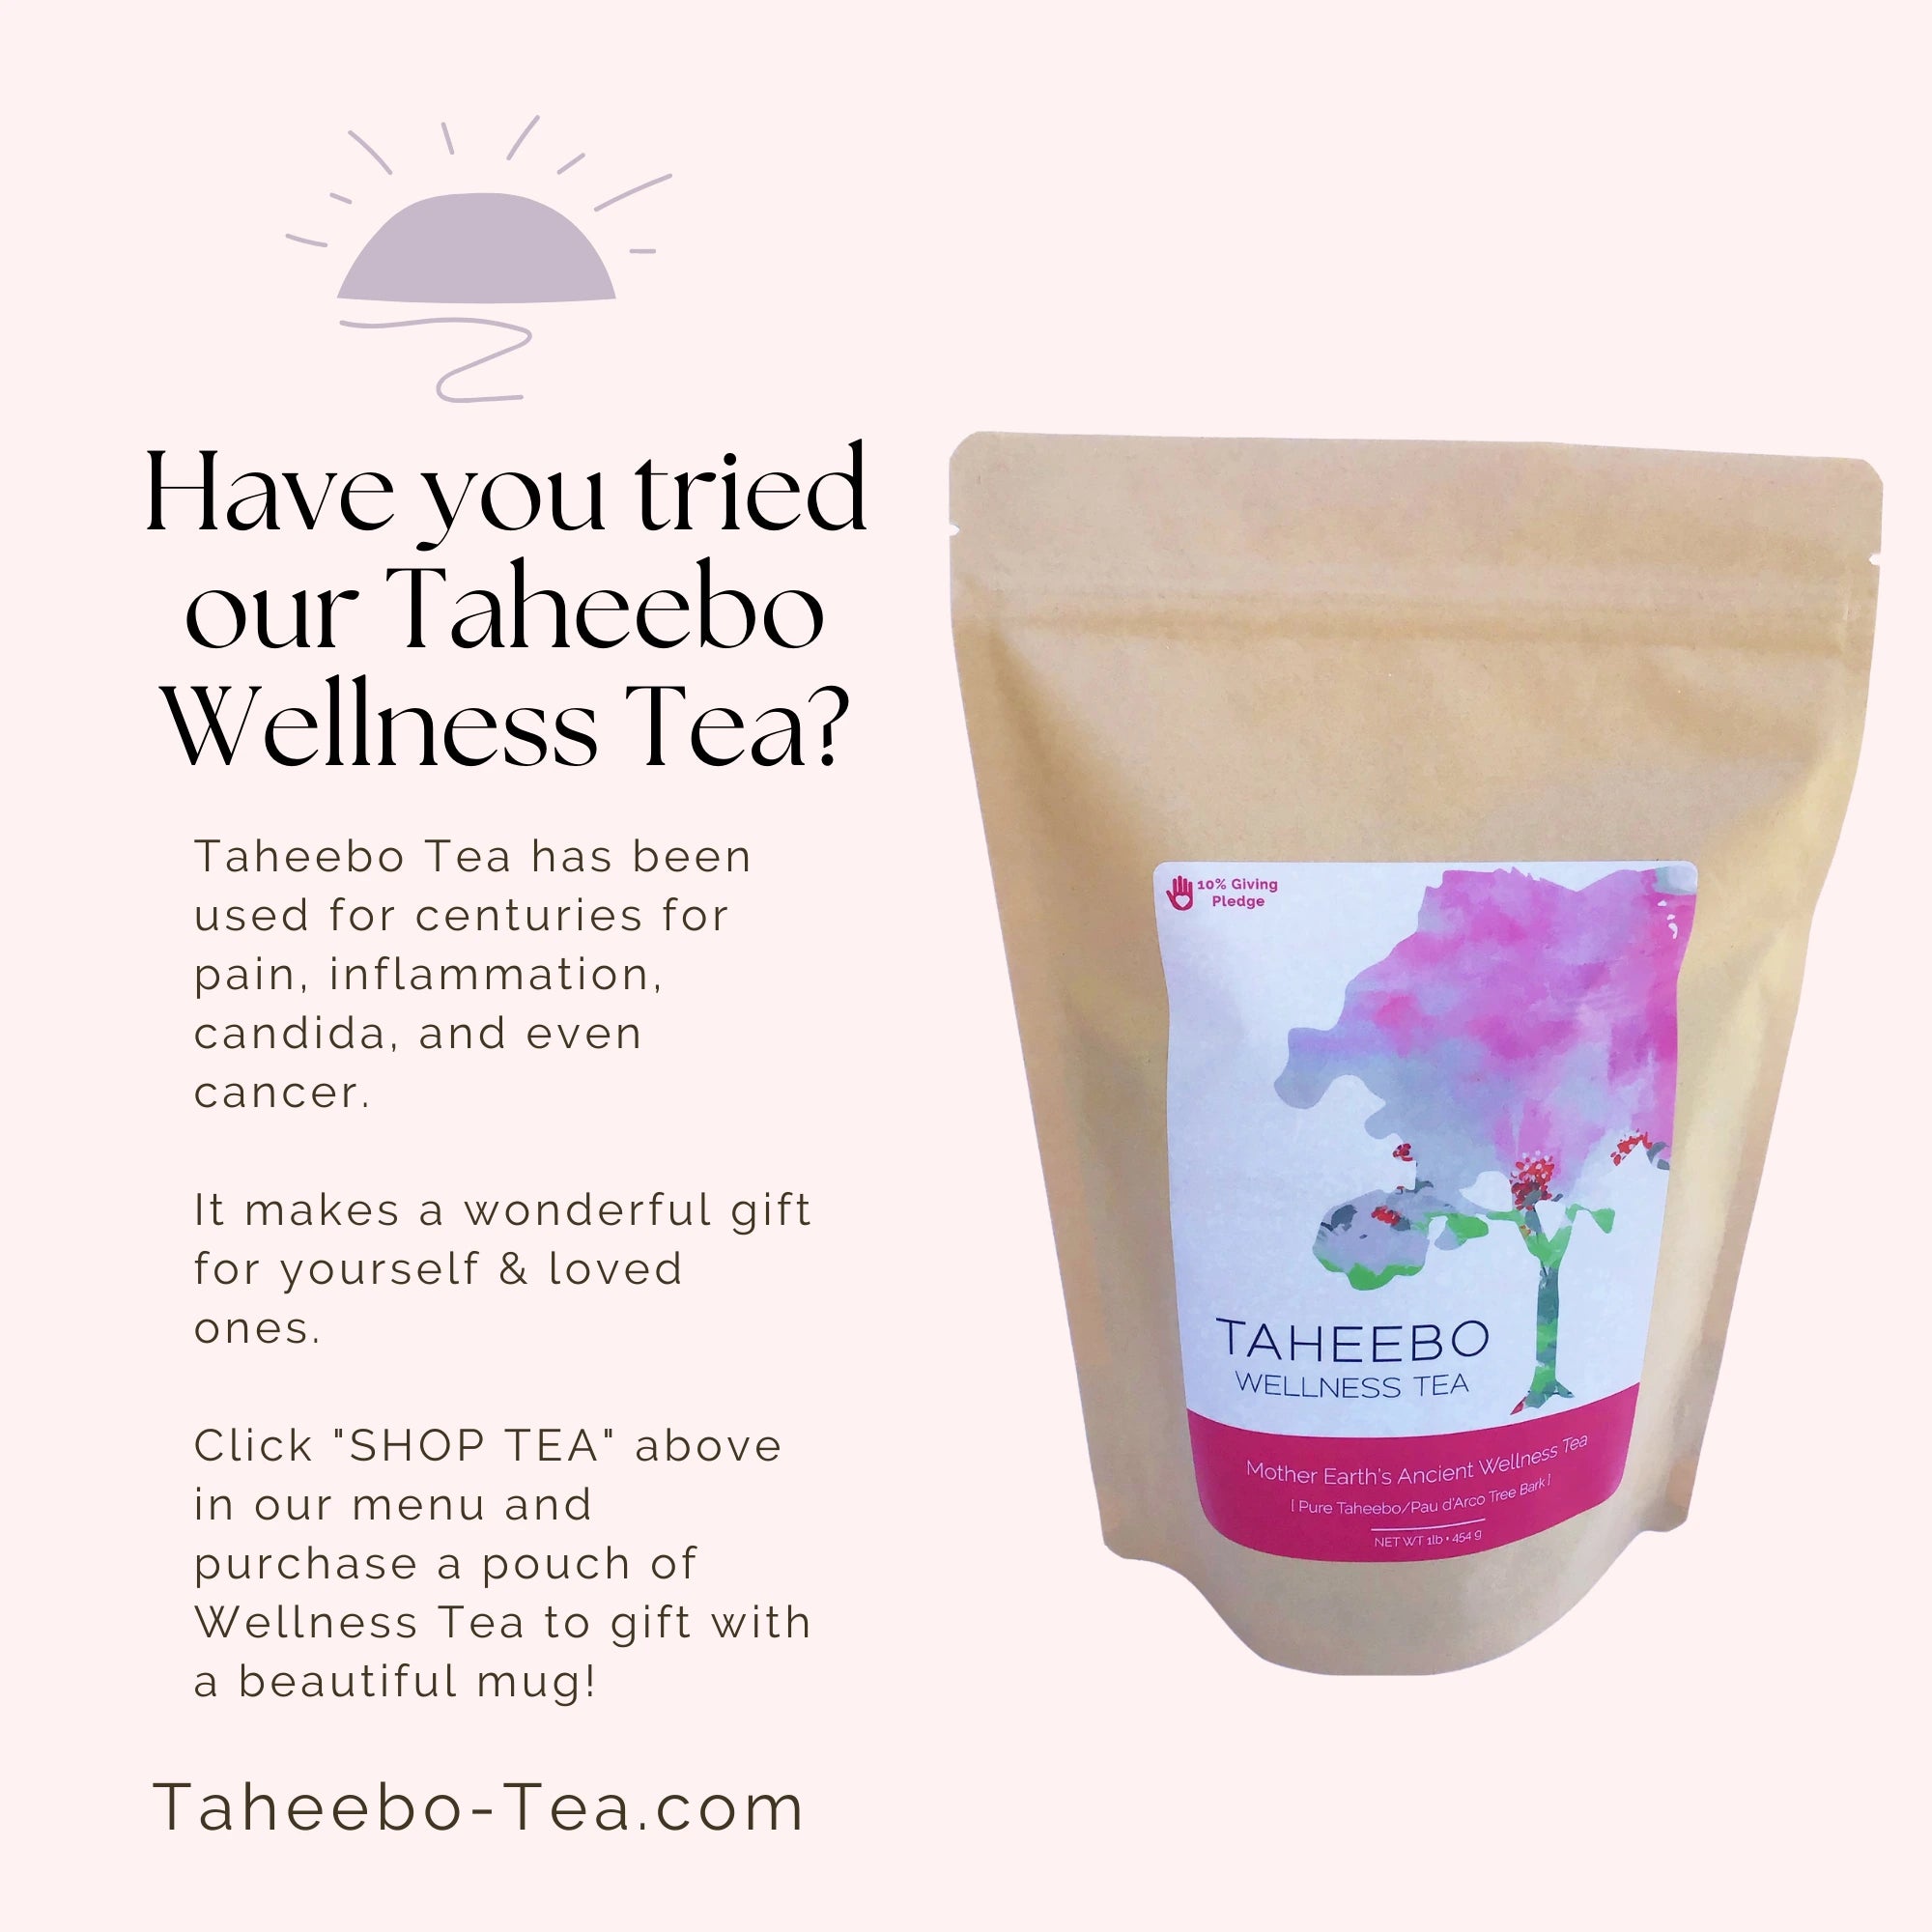 Try some Taheebo Wellness Tea in your brand new mug